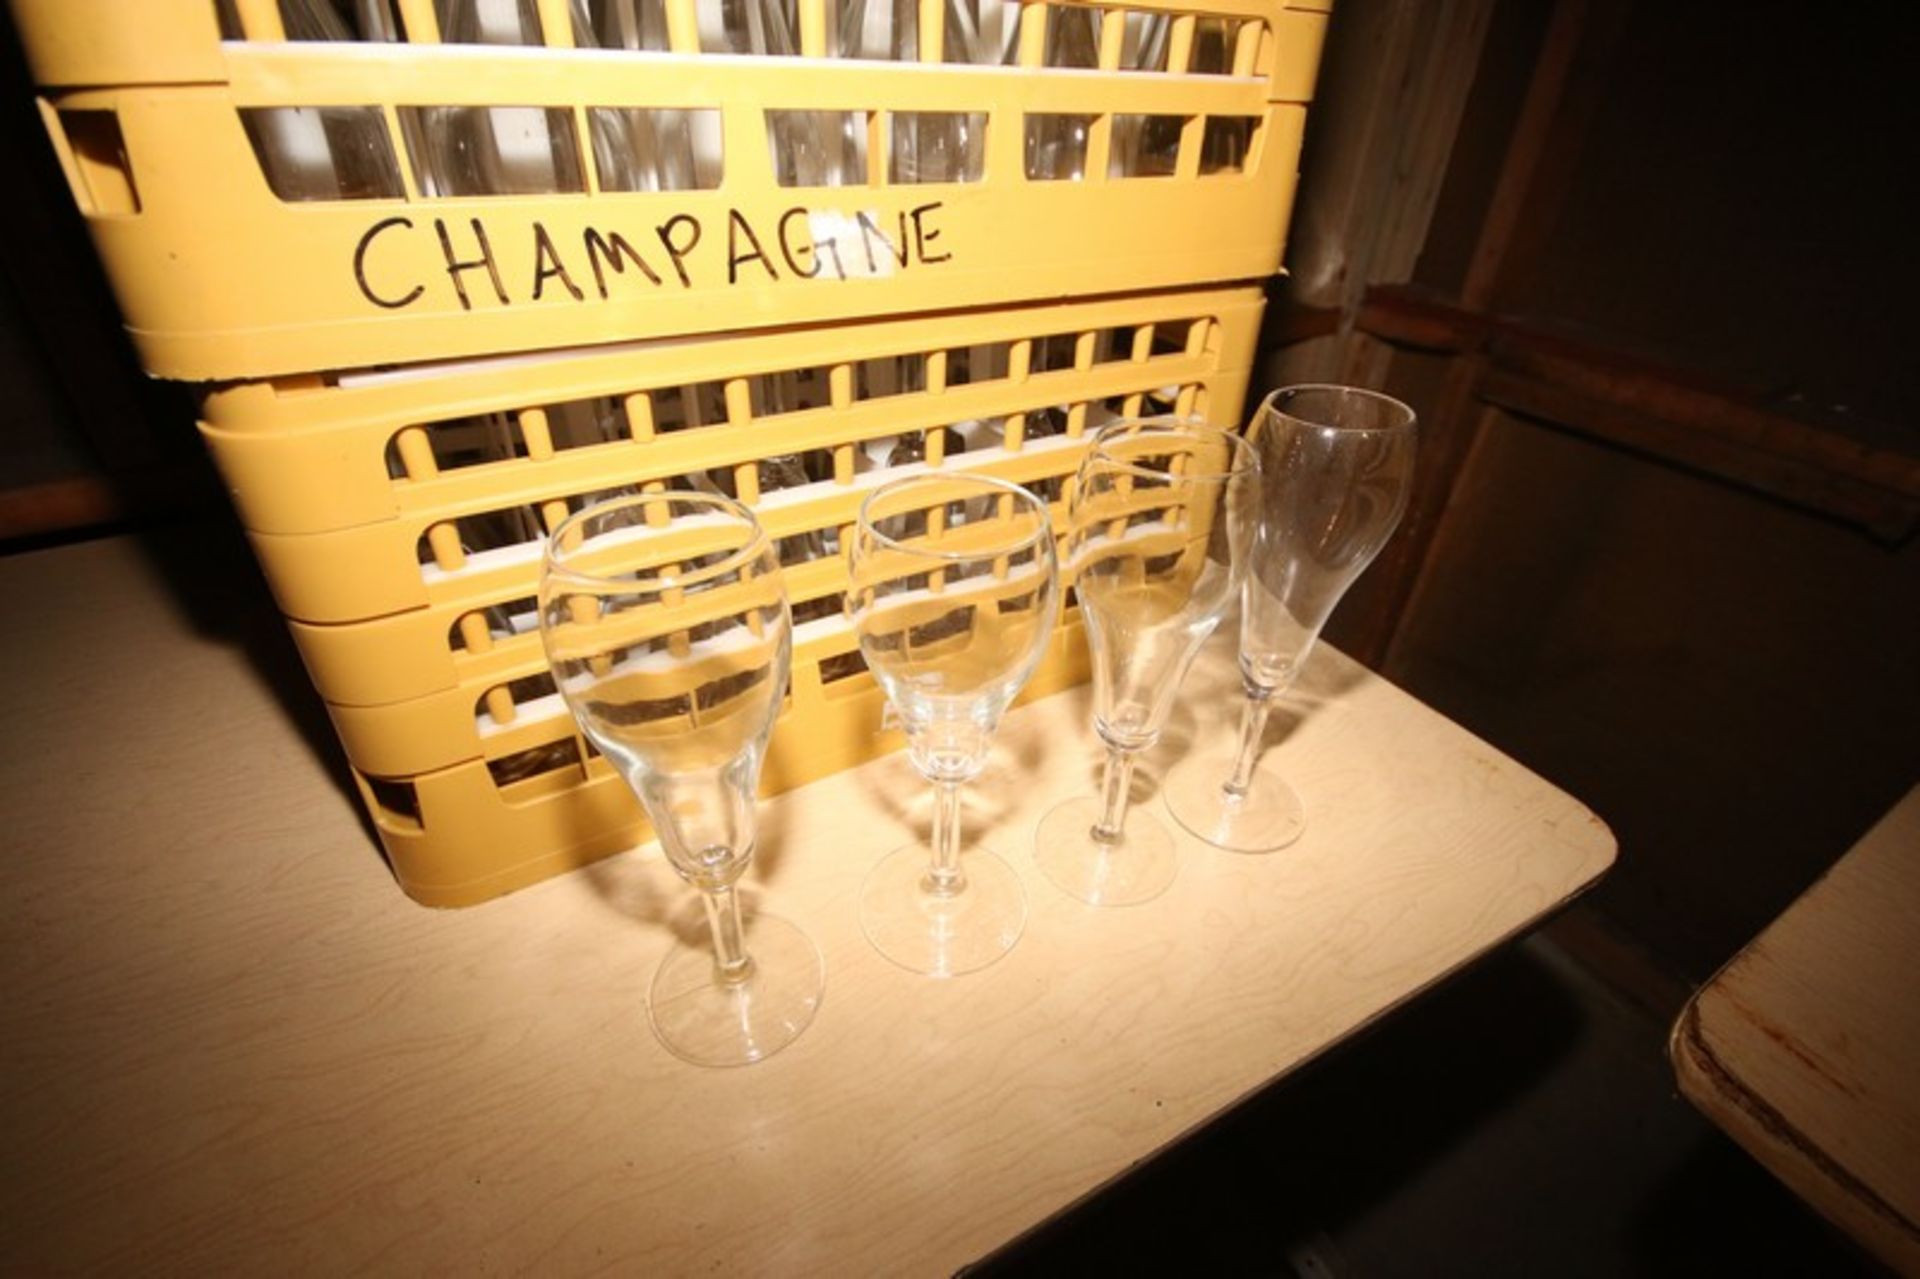 3-Racks of Glass Champagn Glasses, Overall Depth of Glass: Aprox. 4-1/2" & 5", (2) Assorted